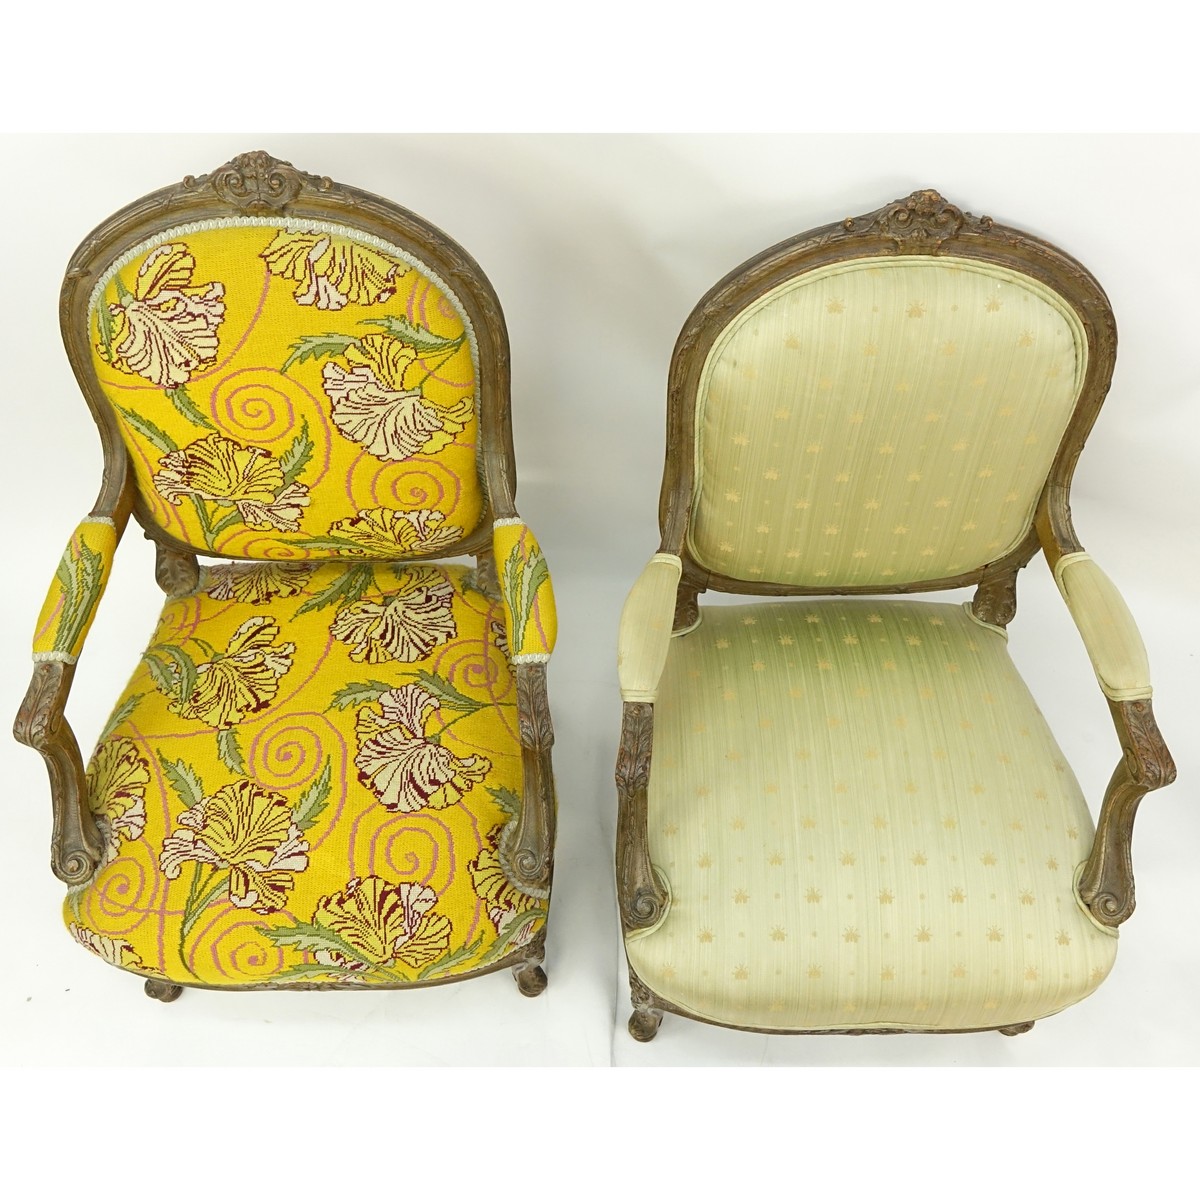 Pair of Louis XV Style  French Carved Wood and Upholstered Fauteuil Chairs. Good condition.